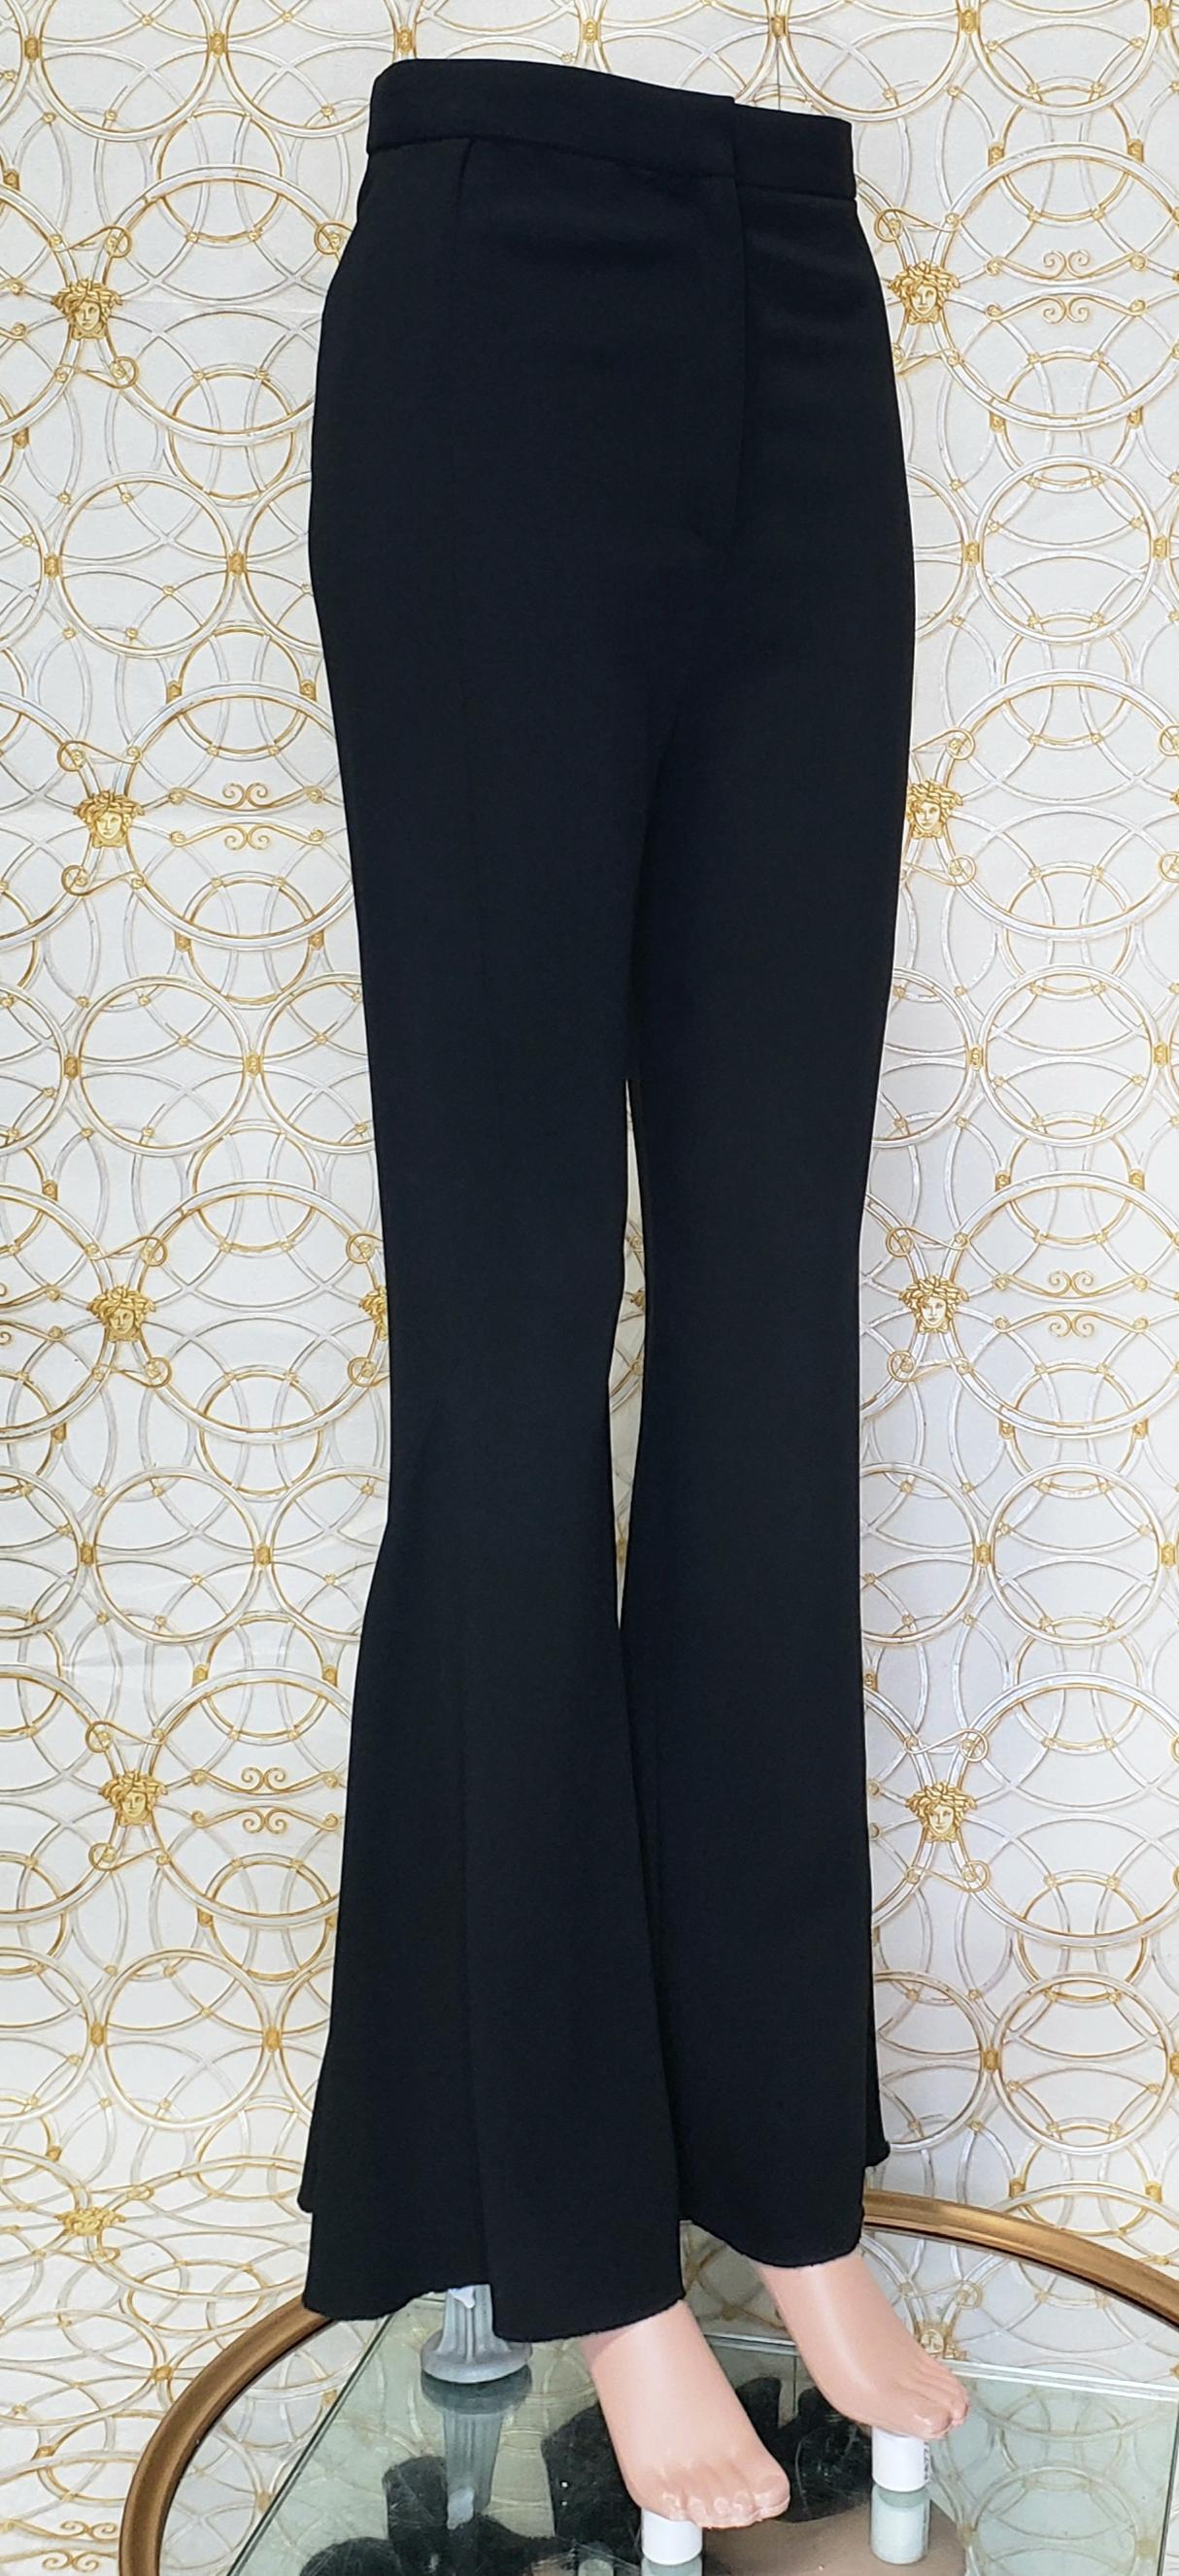 F/W 2015 Look # 13 VERSACE BLACK FLARED PANTS size 38 - 4 For Sale 1